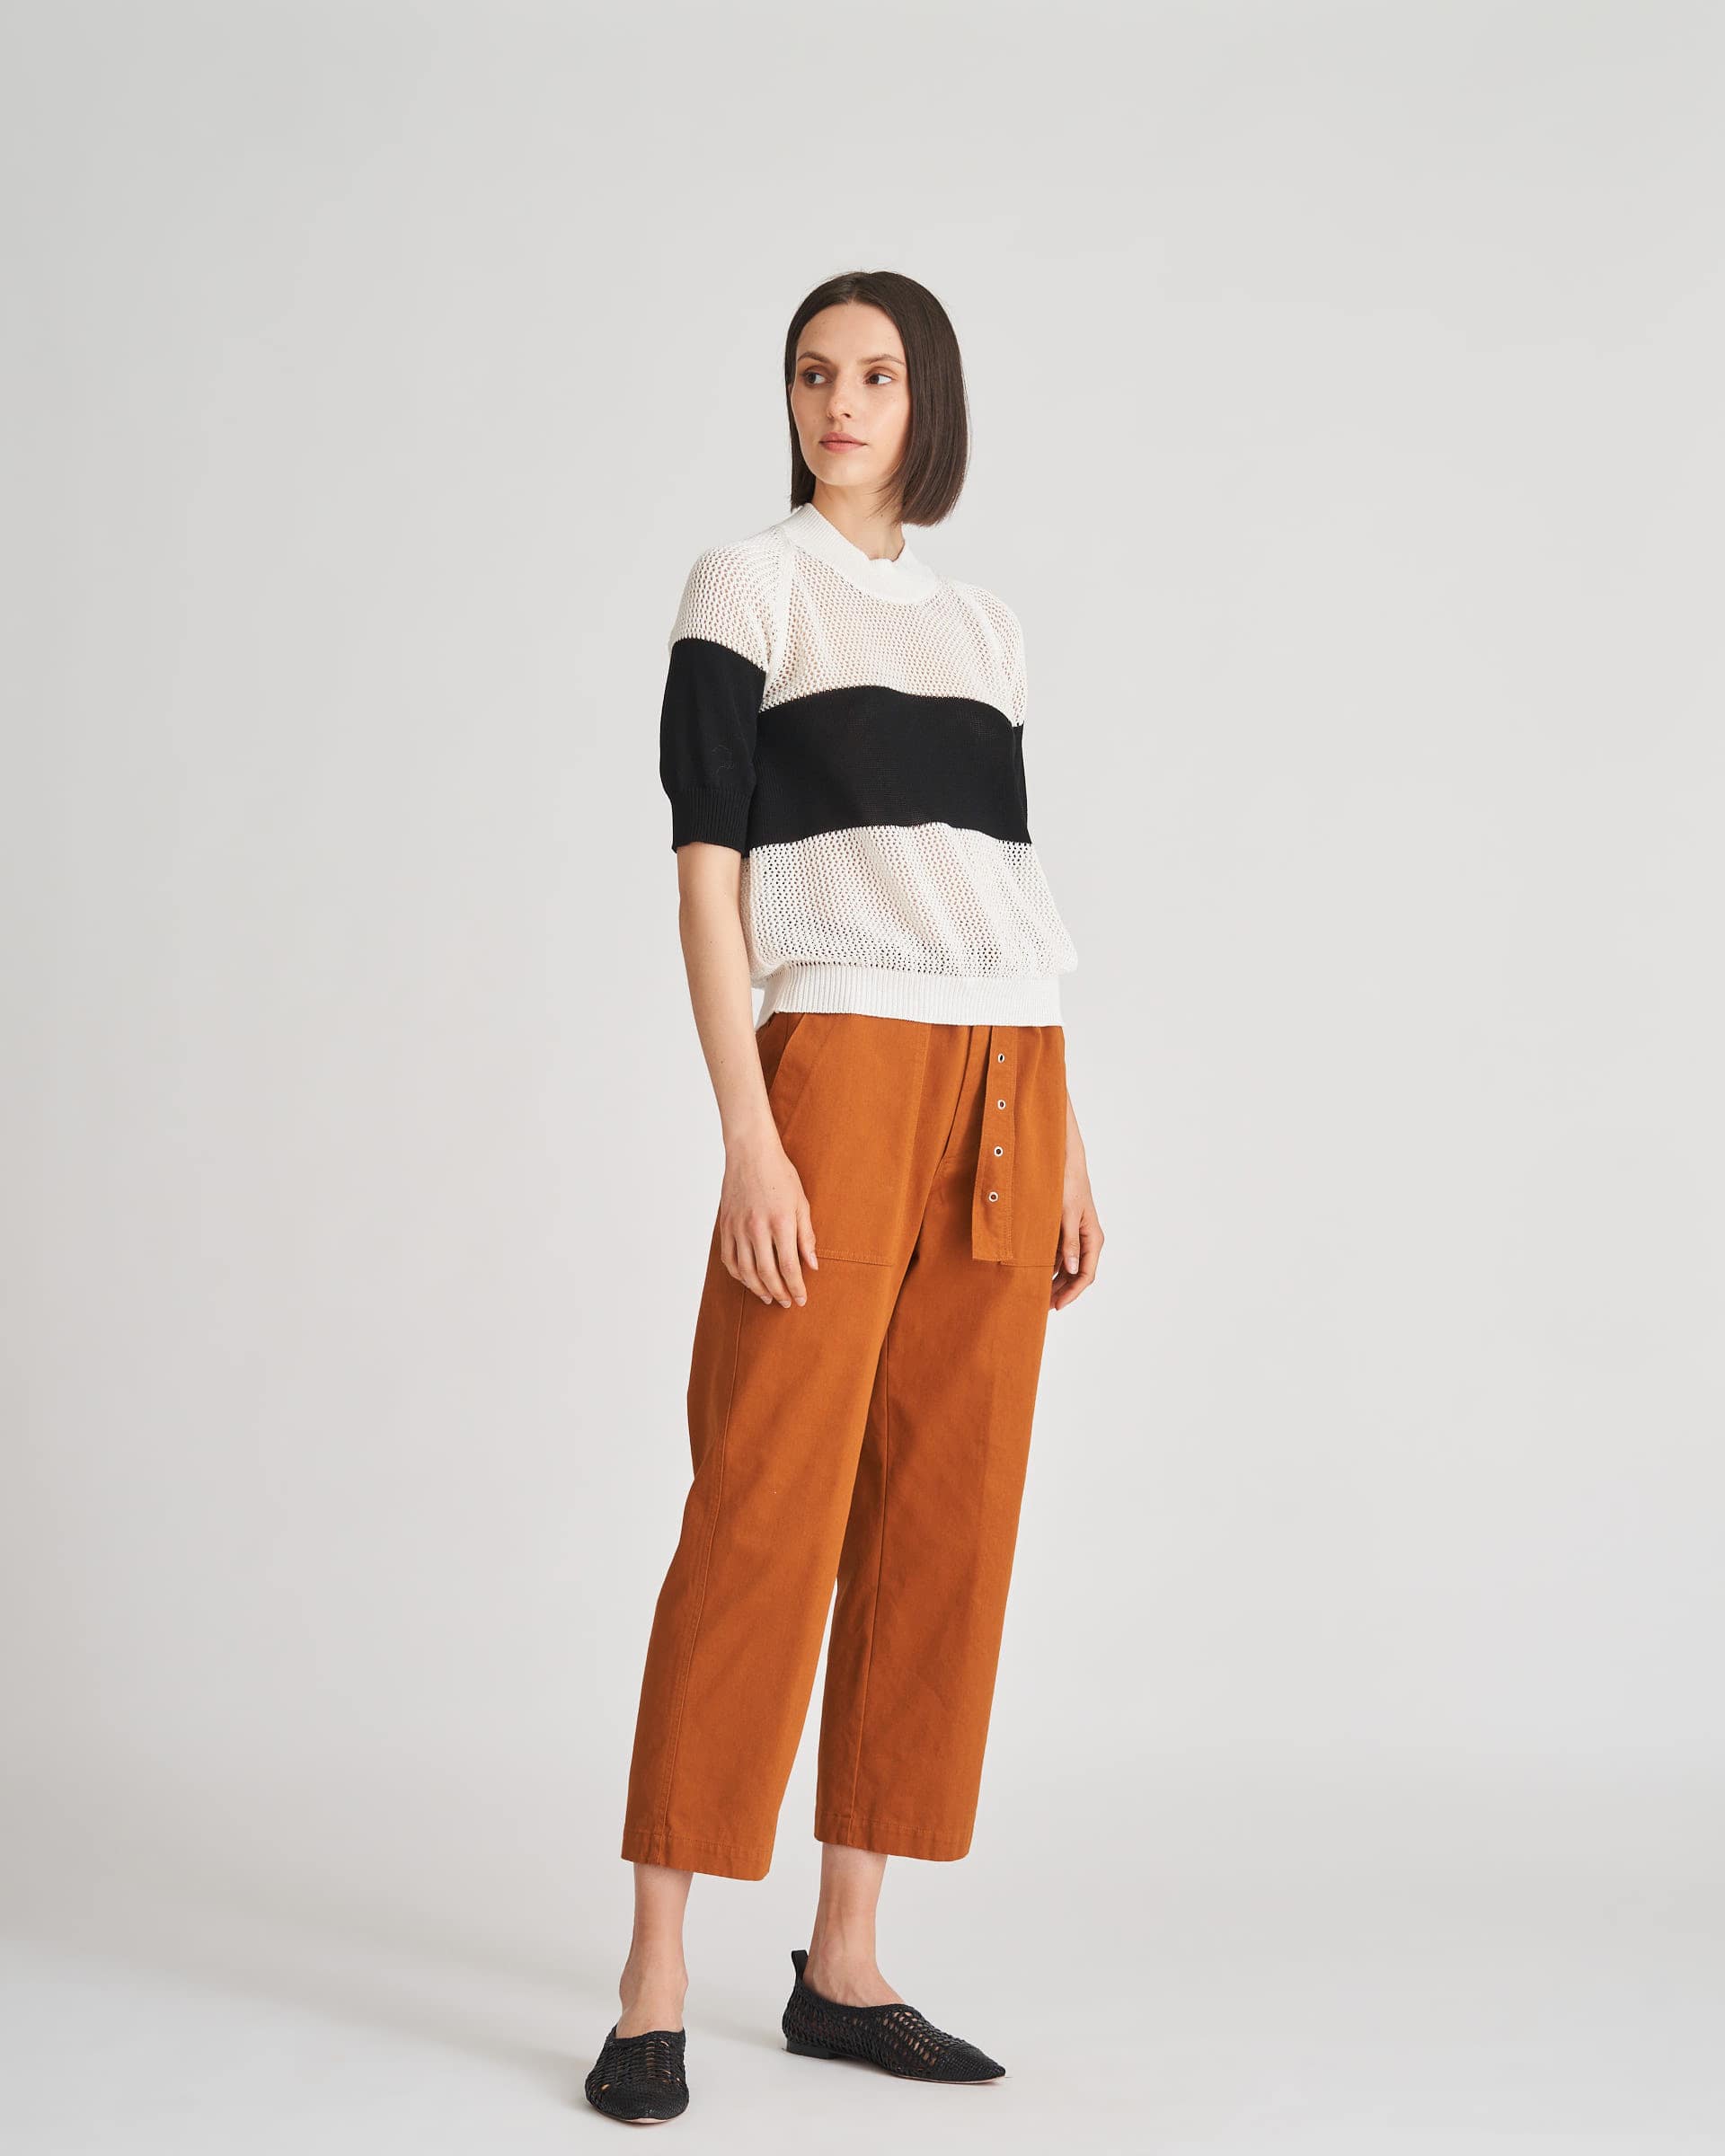 The Market Store | Striped Perforated Lupetto